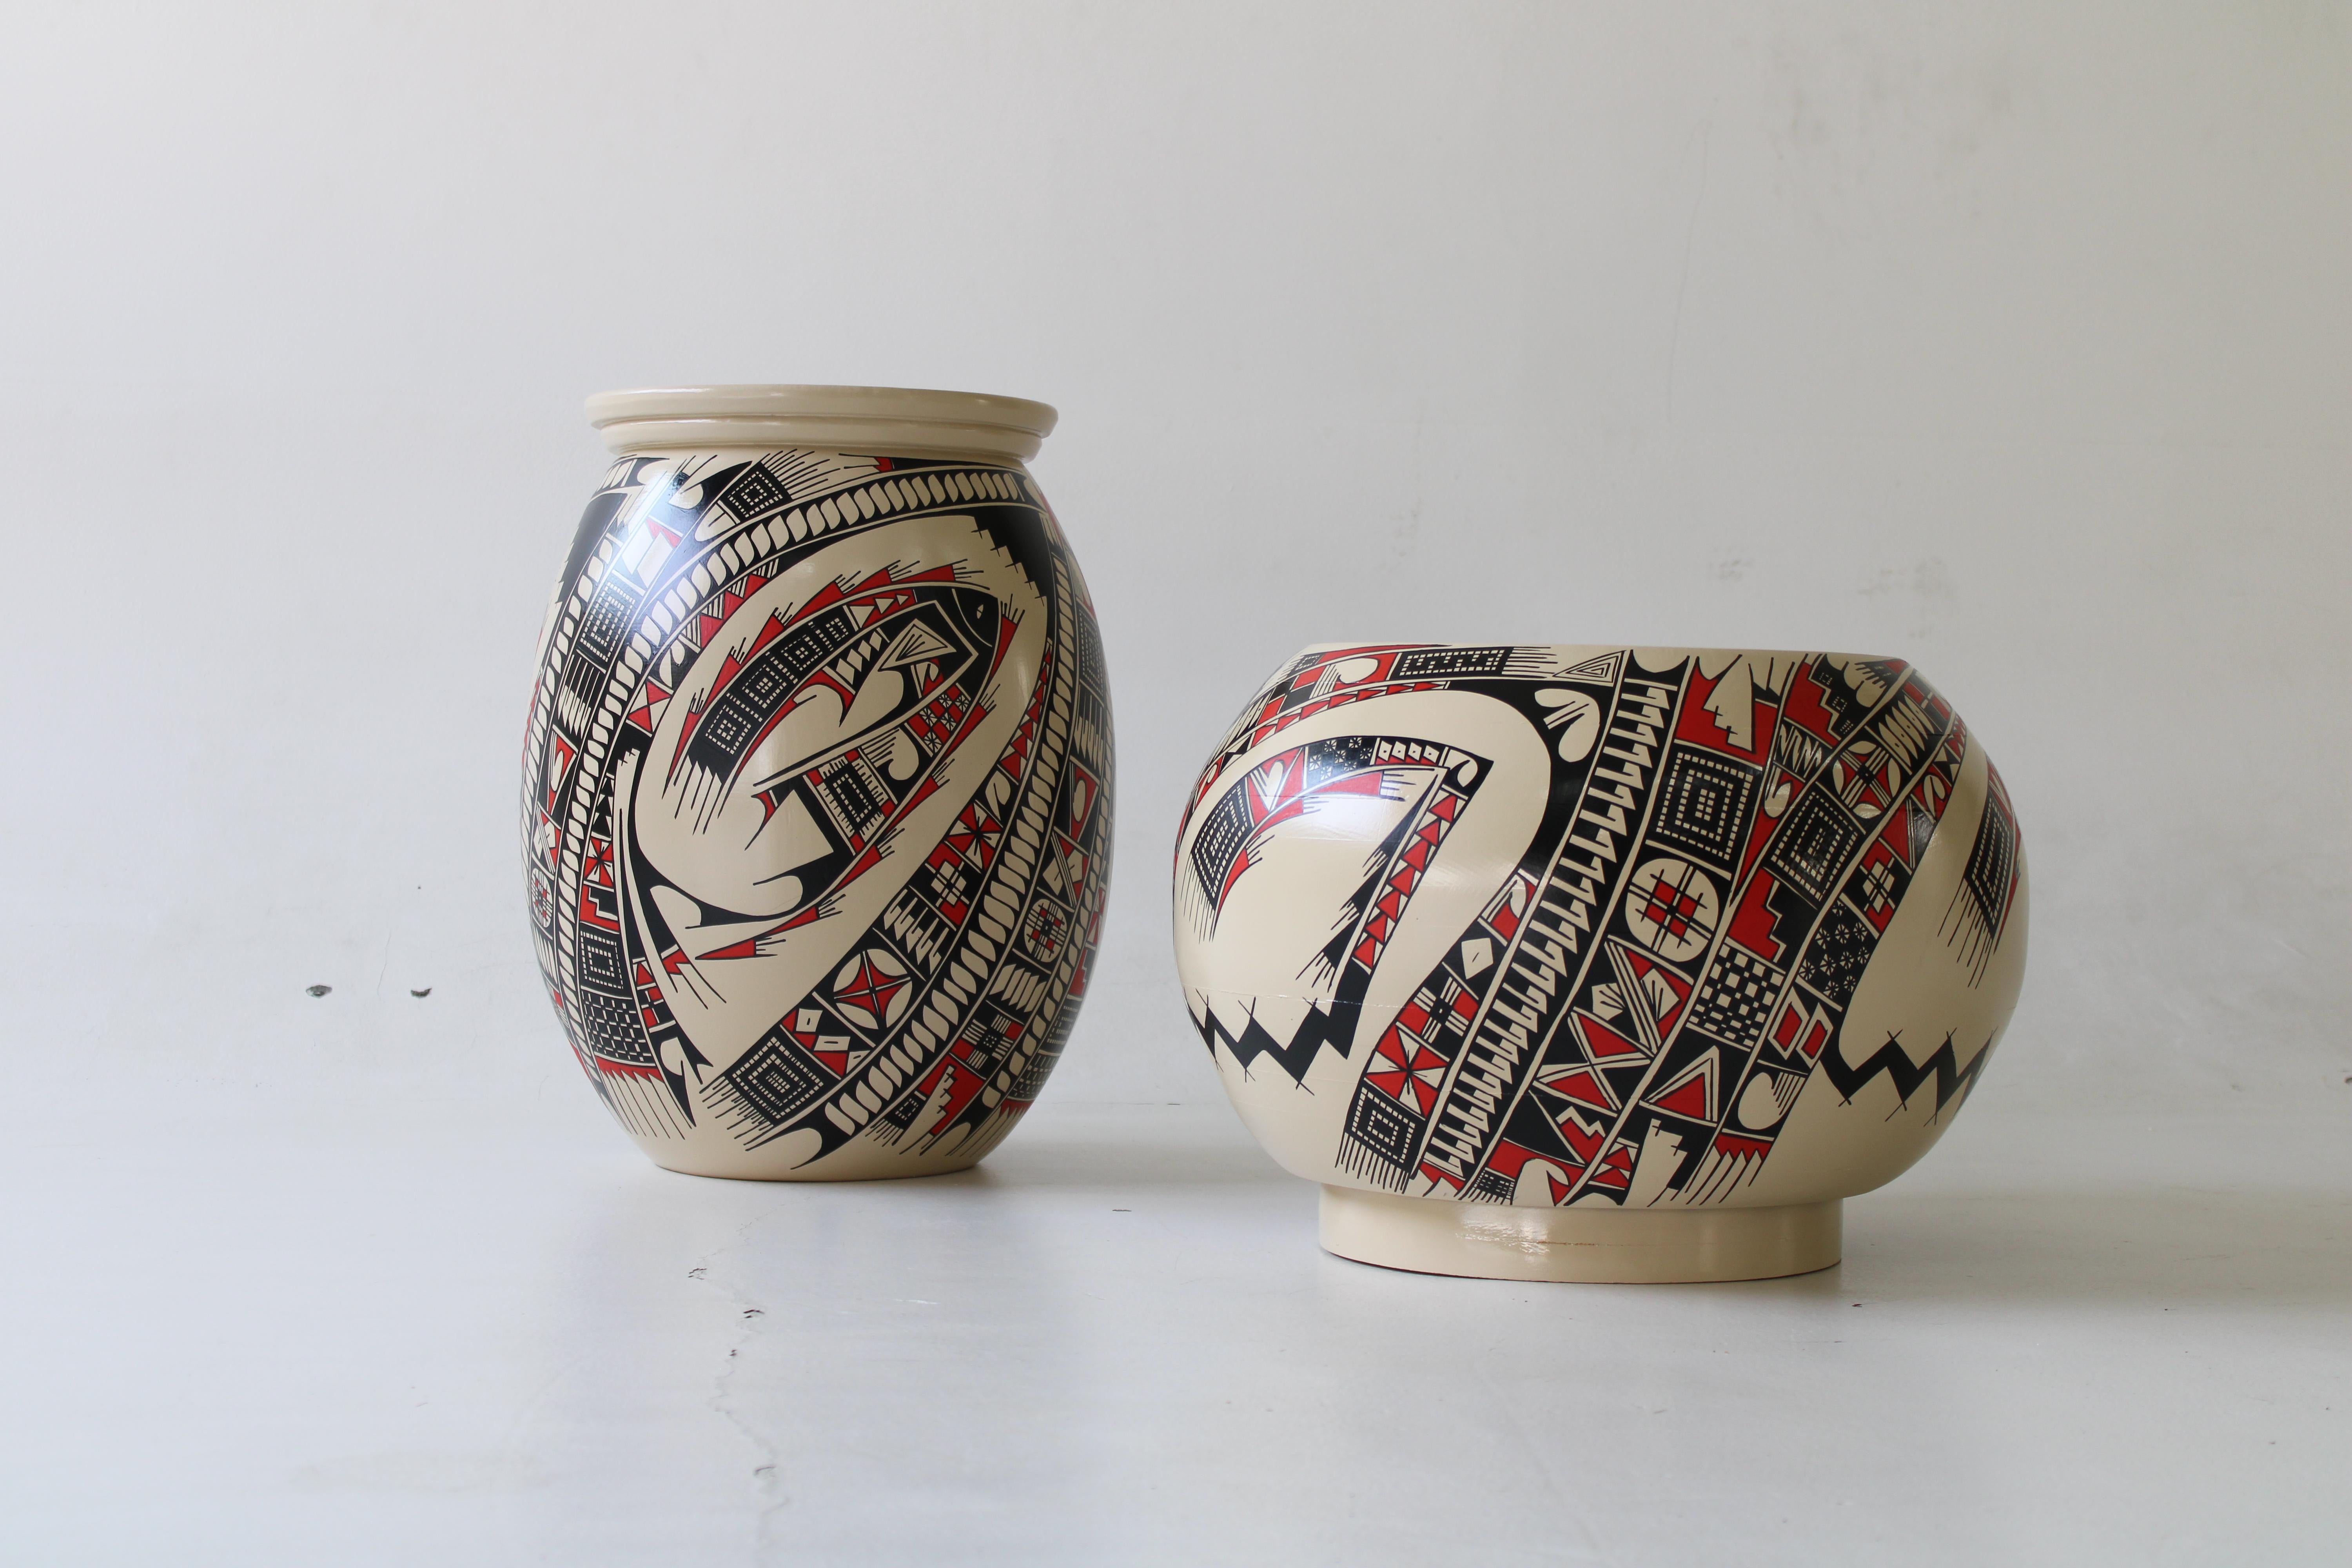 Set of 2 olla stools II and III by Brera Studio.
One of a kind.
Dimensions: Olla Stool II: D 50 x W 50 x H 40 cm. Olla Stool III: D 40 x W 40 x H 50 cm.
Materials: pinewood and paint.

Made from endemic pine wood in the region of Chihuahua, and